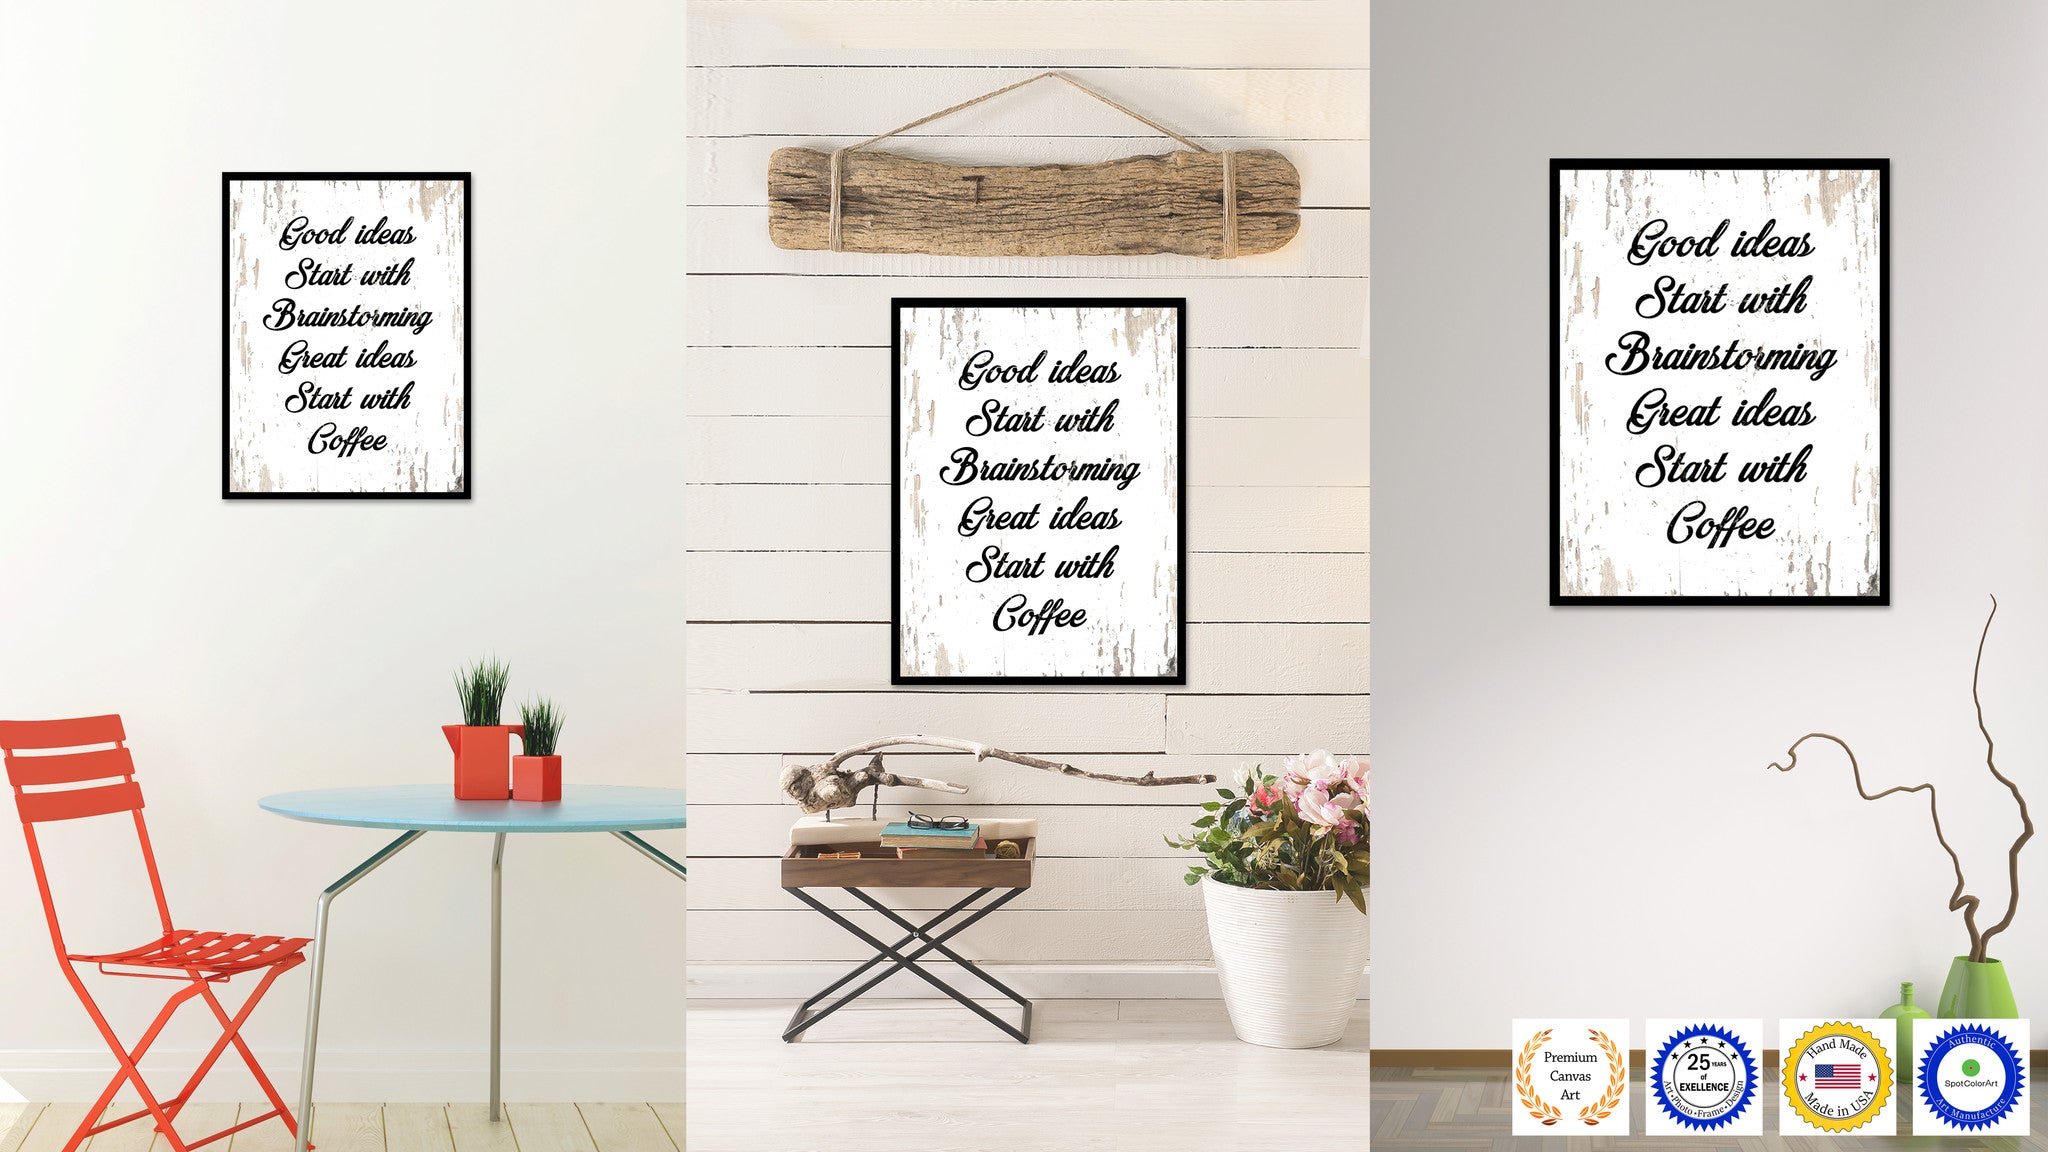 Good Ideas Start With Brainstorming Great Ideas Start With Coffee Quote Saying Canvas Print with Picture Frame